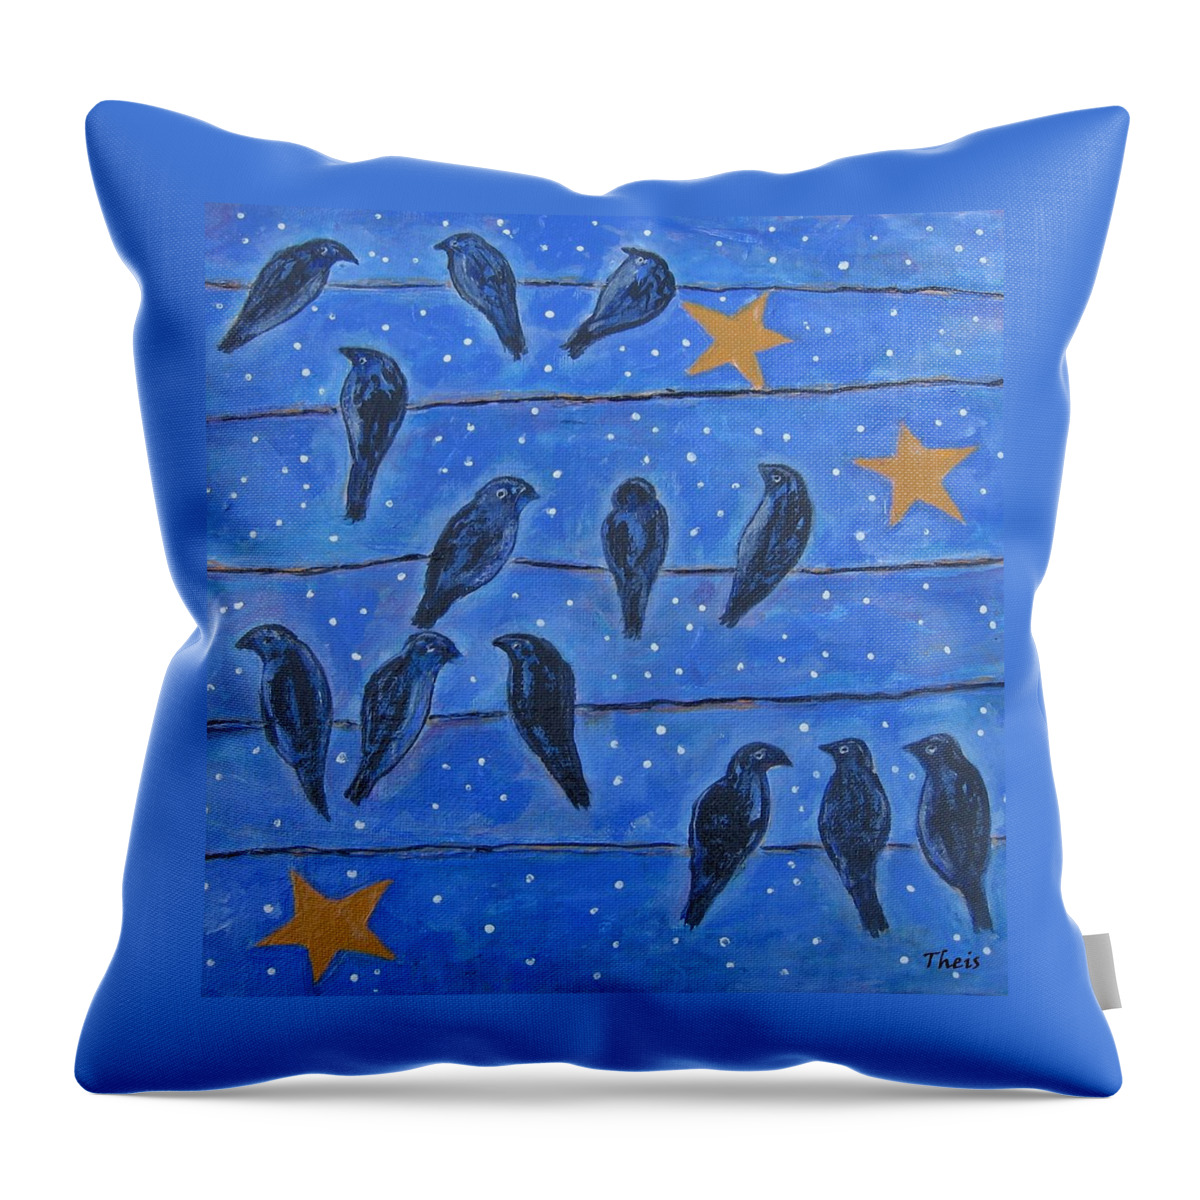 Black Birds Throw Pillow featuring the painting Hanging Out at Night by Suzanne Theis